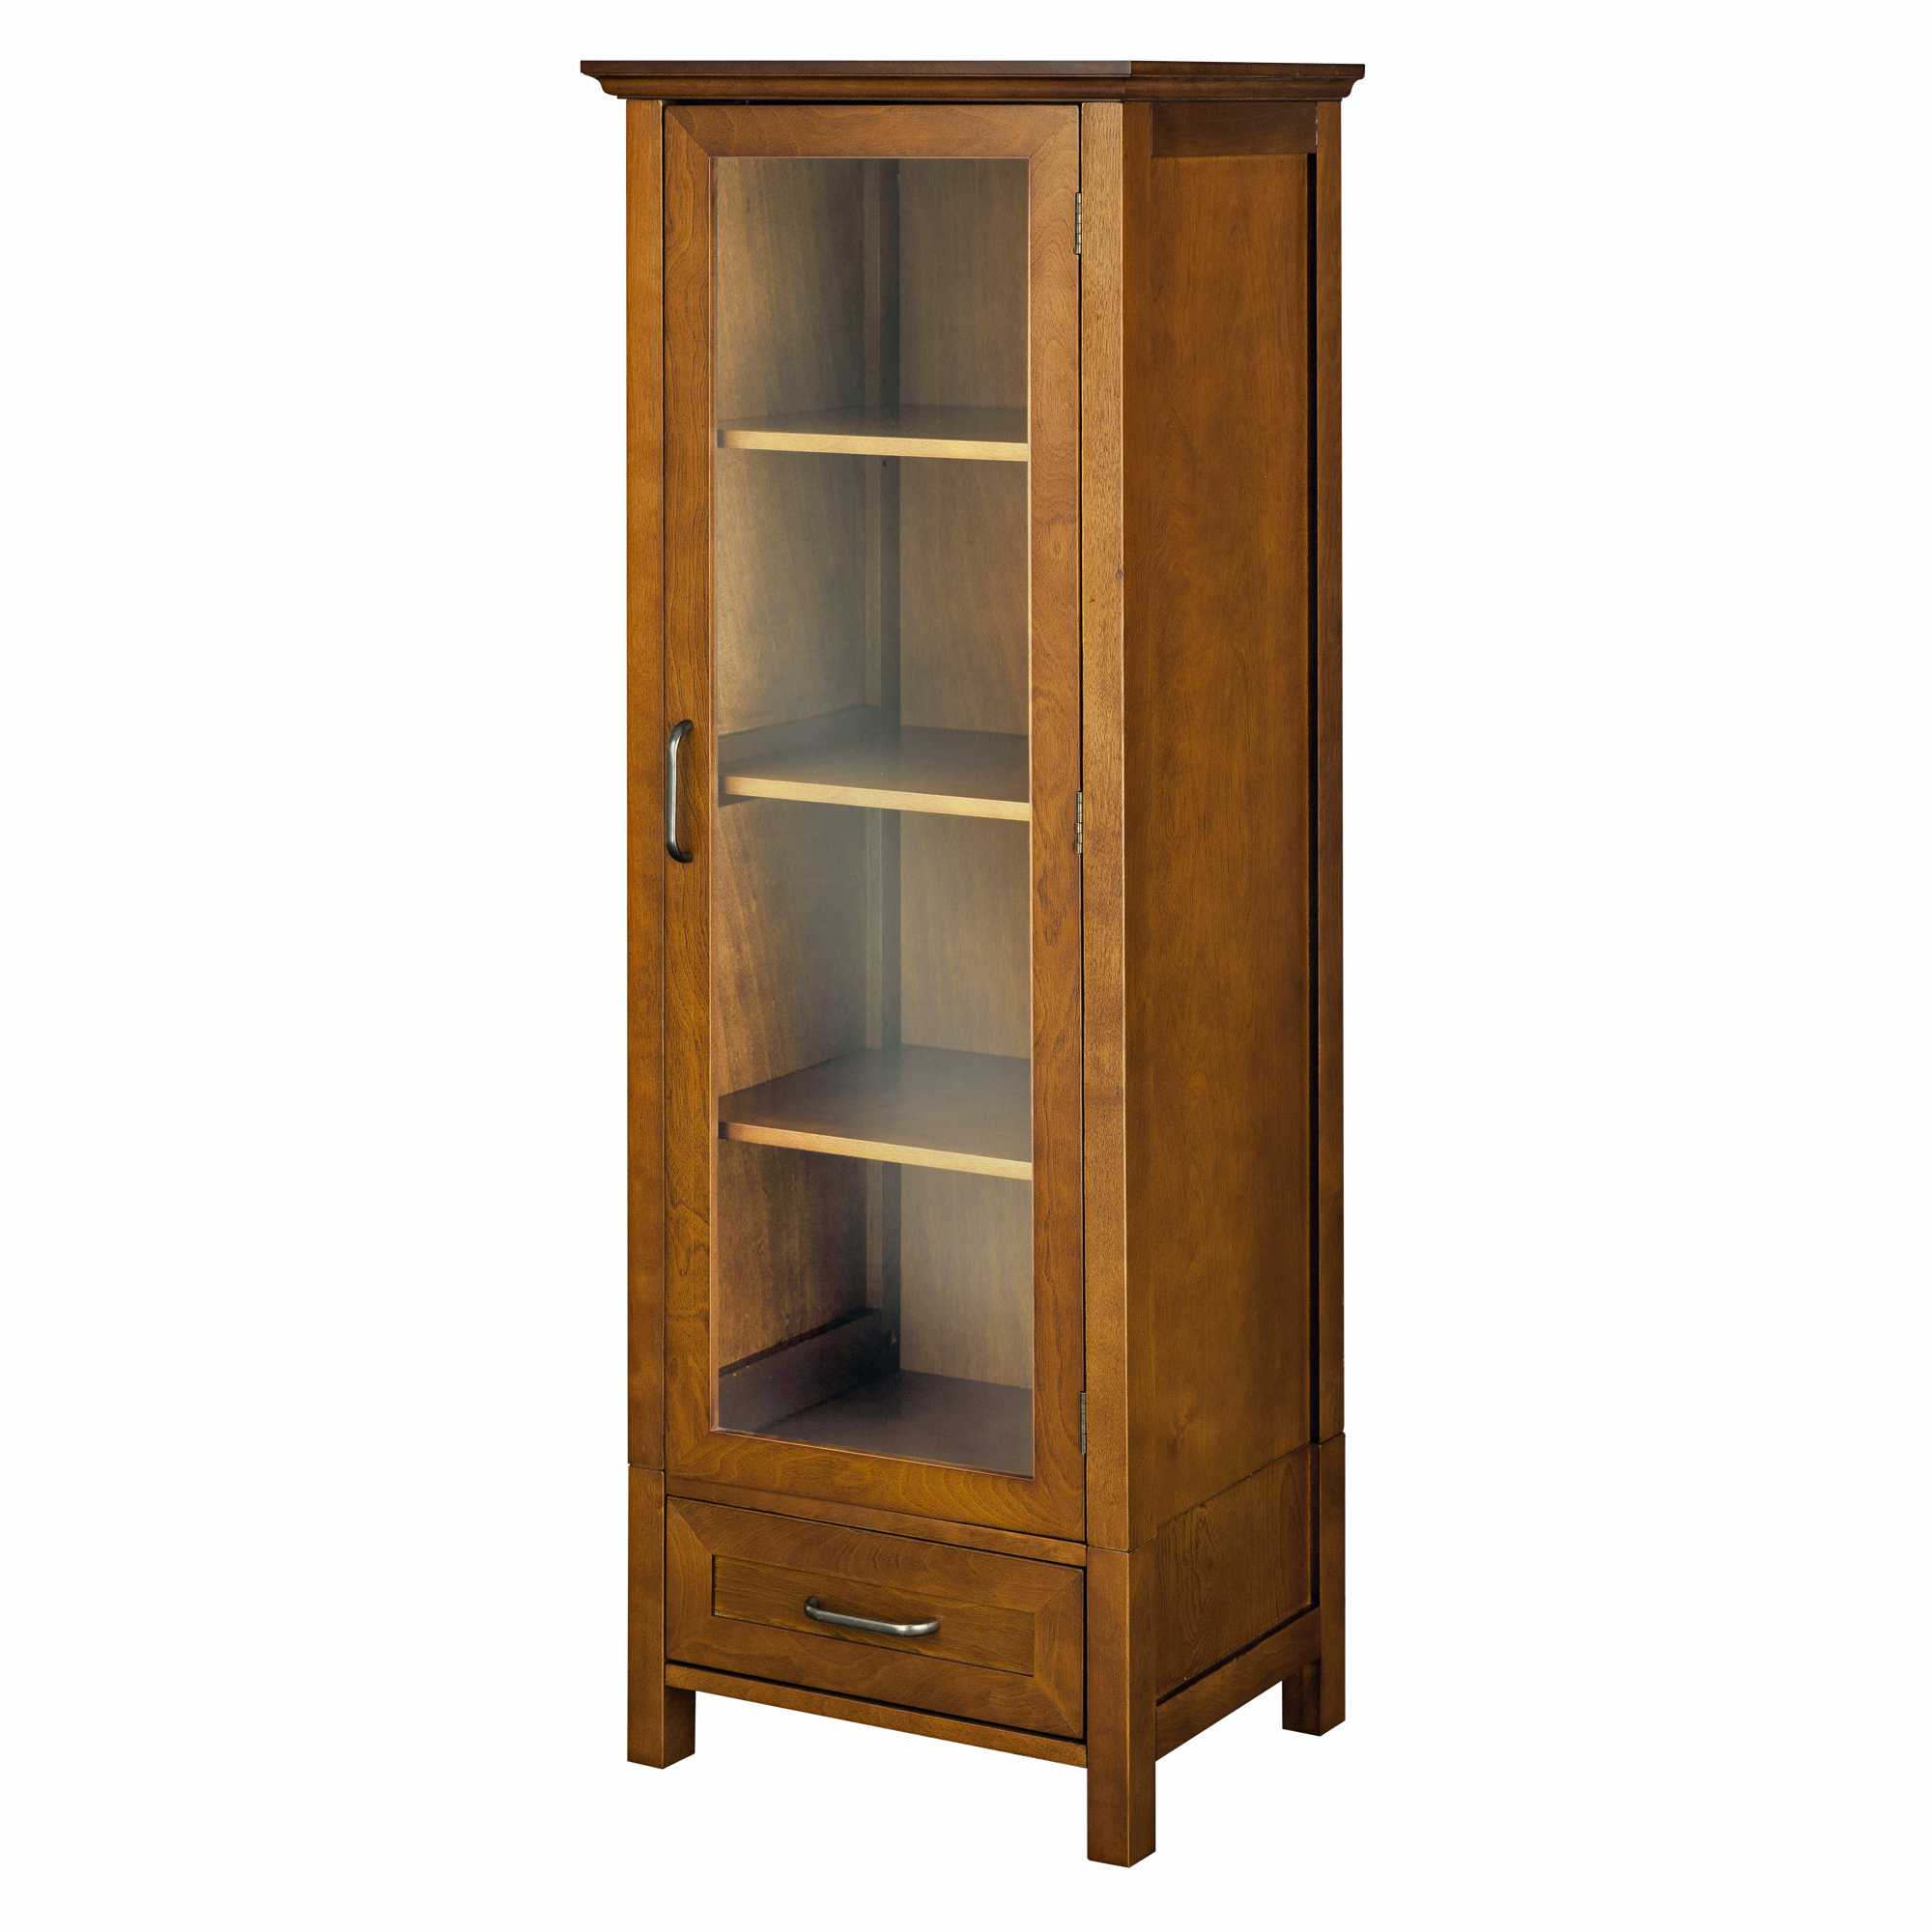 Elegant Home Fashions Calais Wood Linen Cabinet with Glass Door, Oil Oak - image 3 of 7